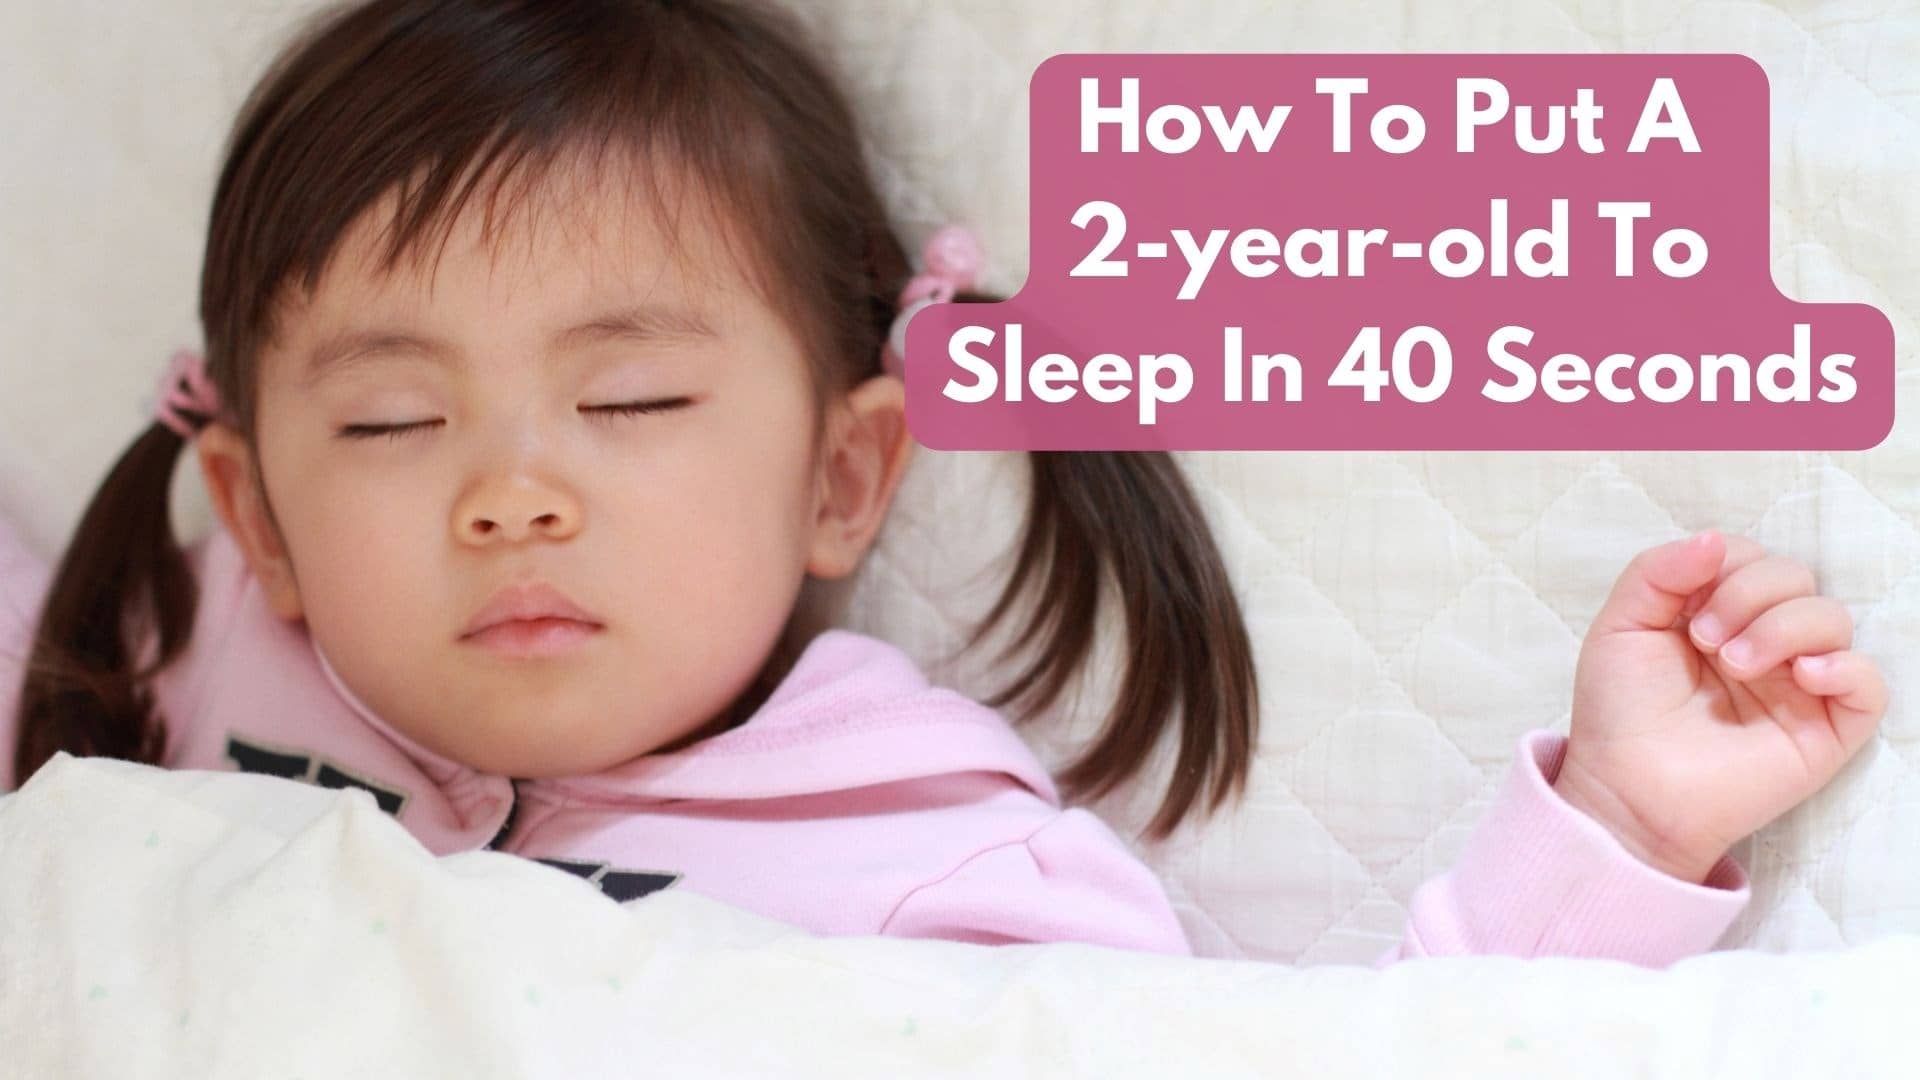 How To Put A 2-year-old To Sleep In 40 Seconds?